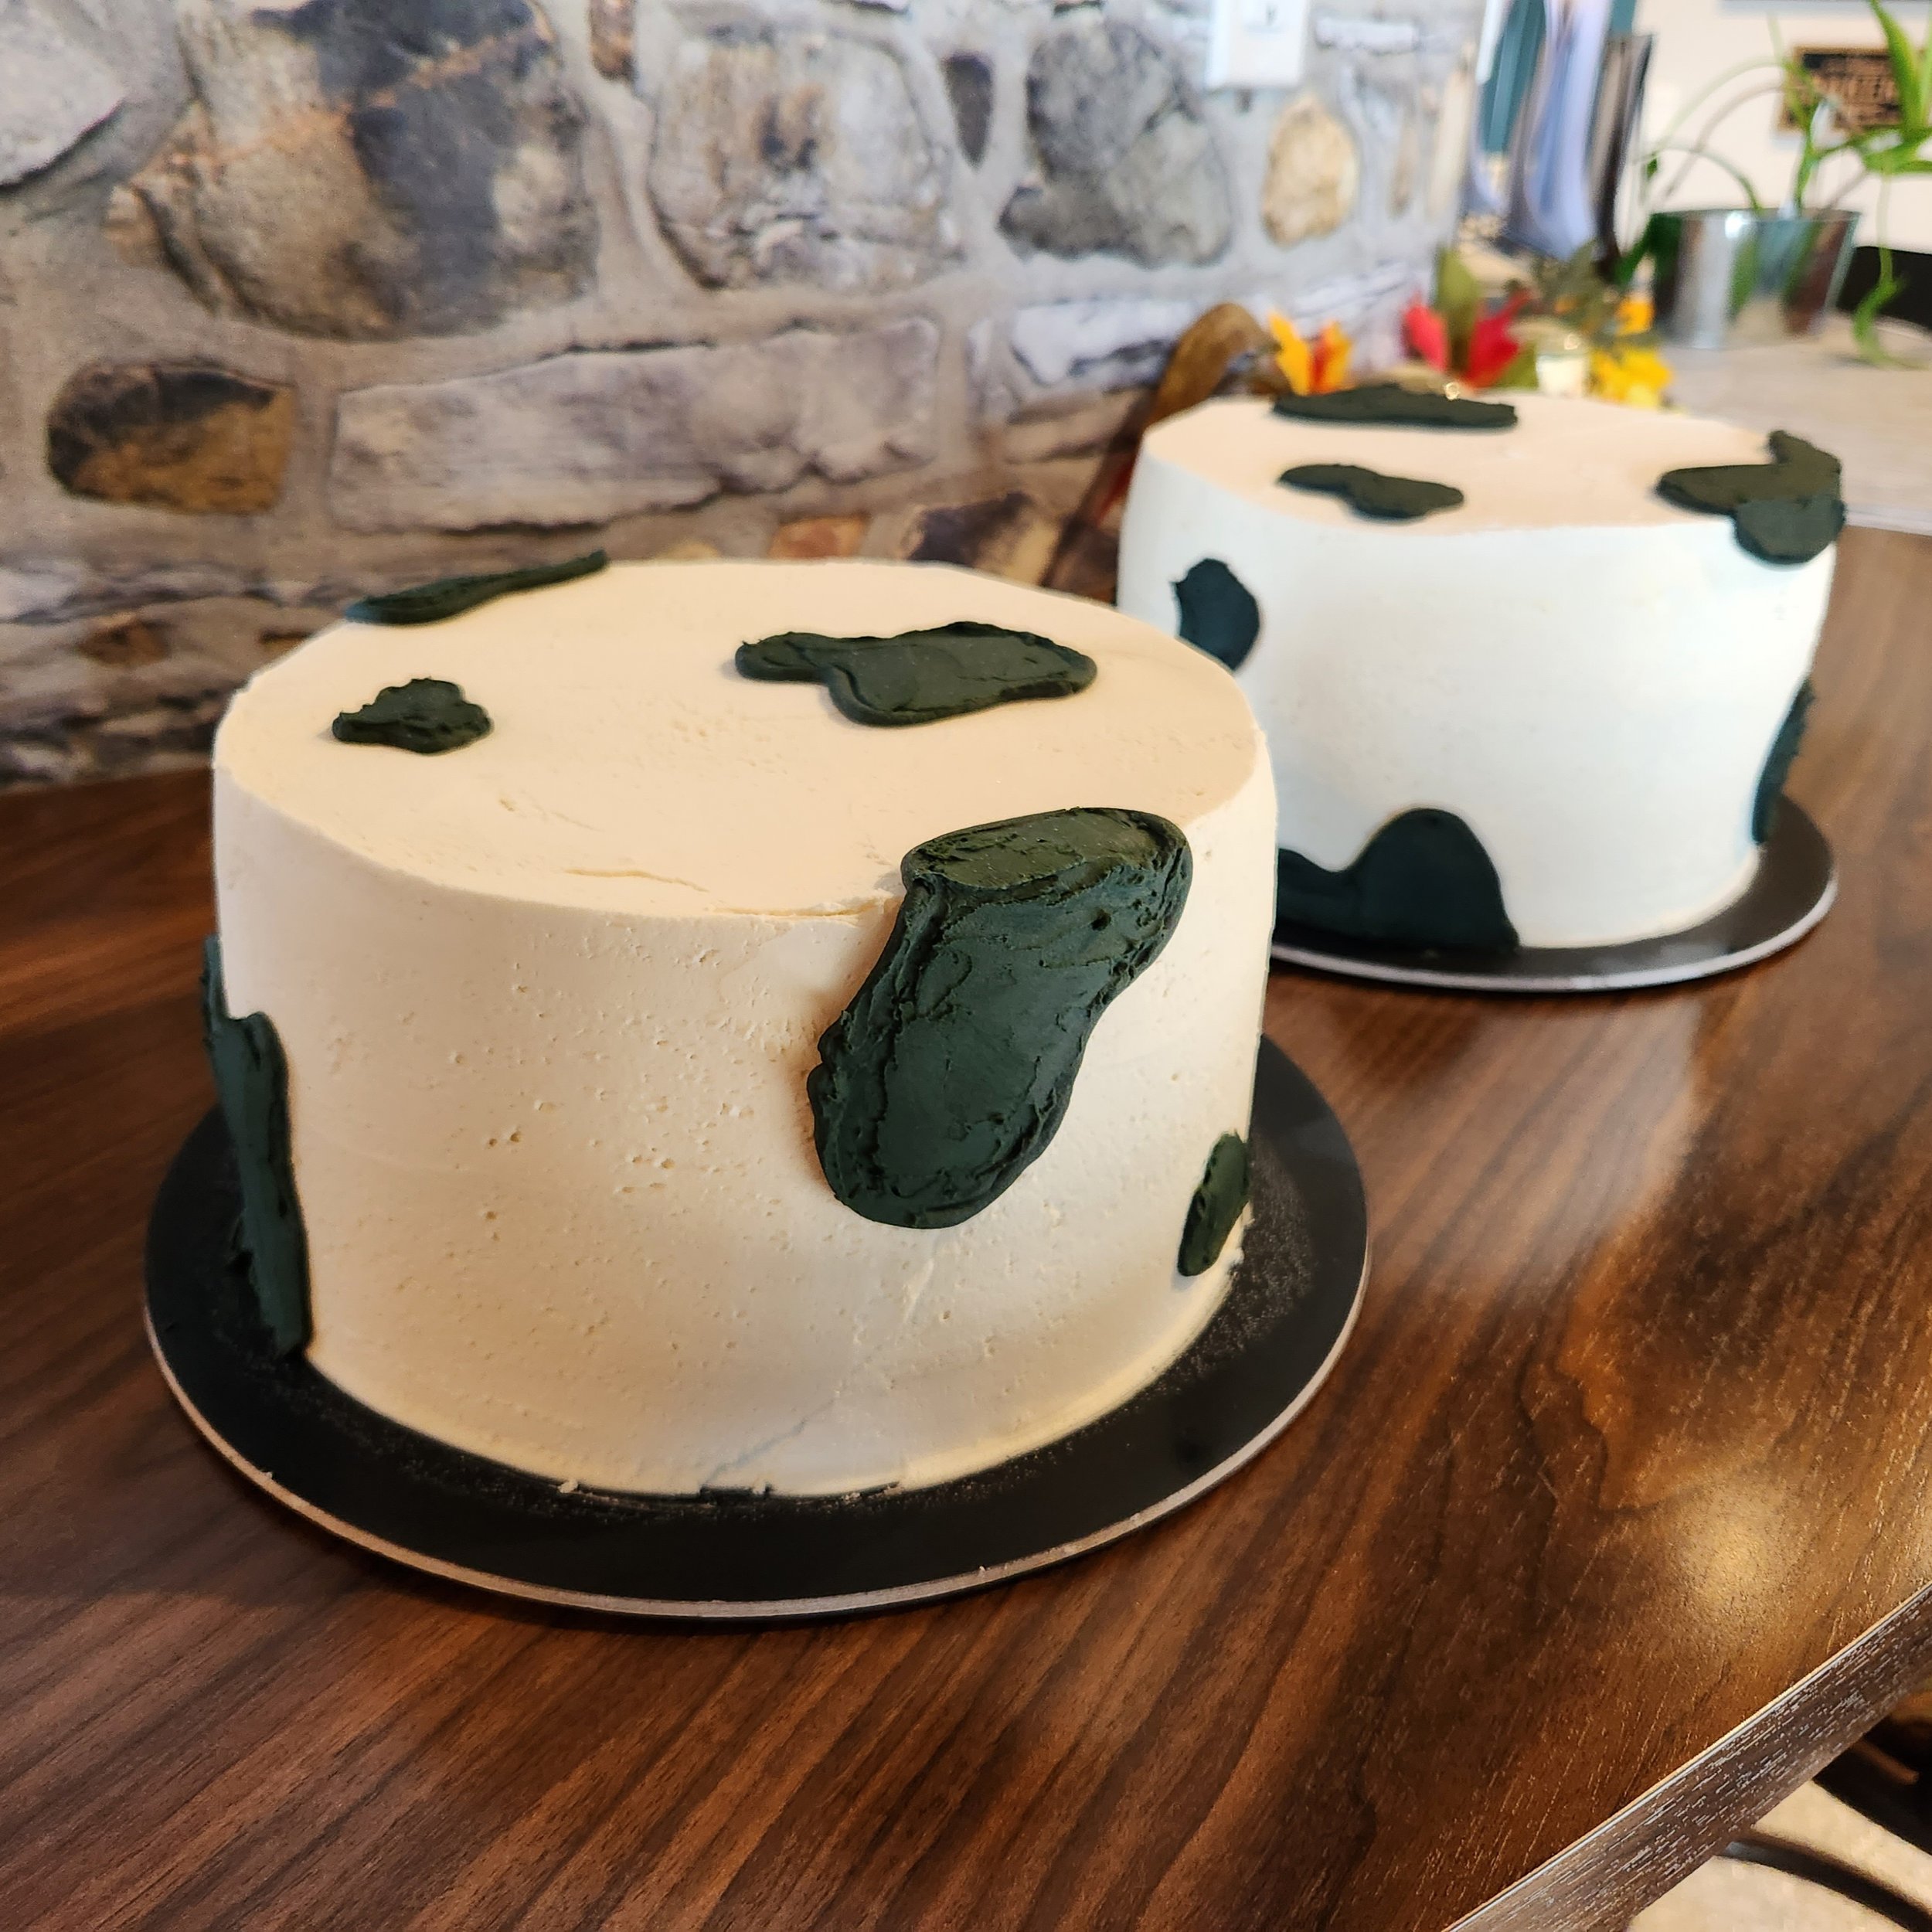 Matching cow cakes